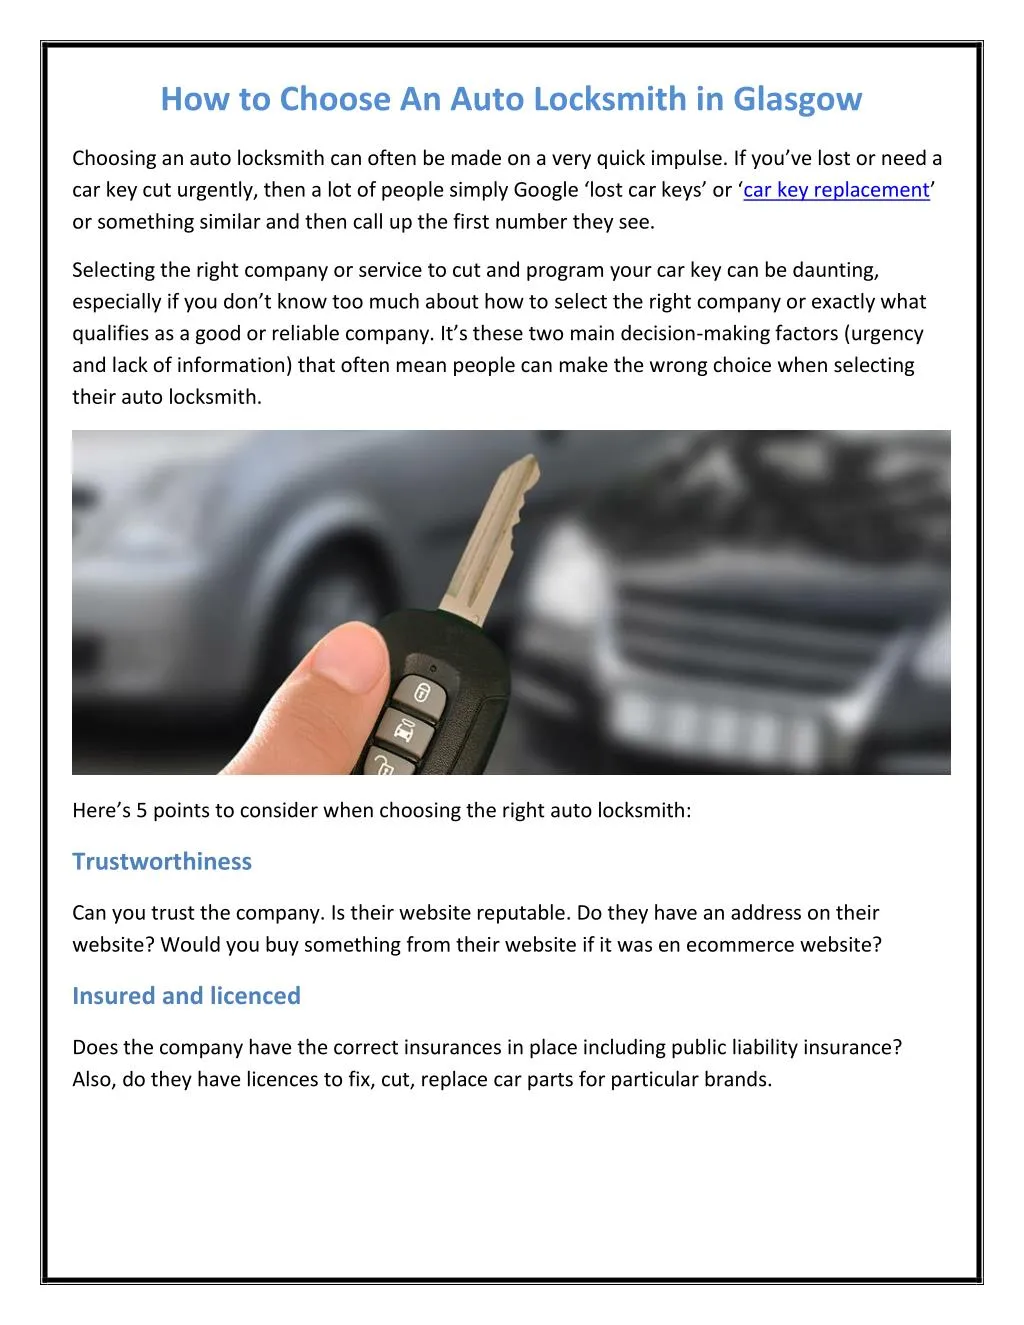 how to choose an auto locksmith in glasgow